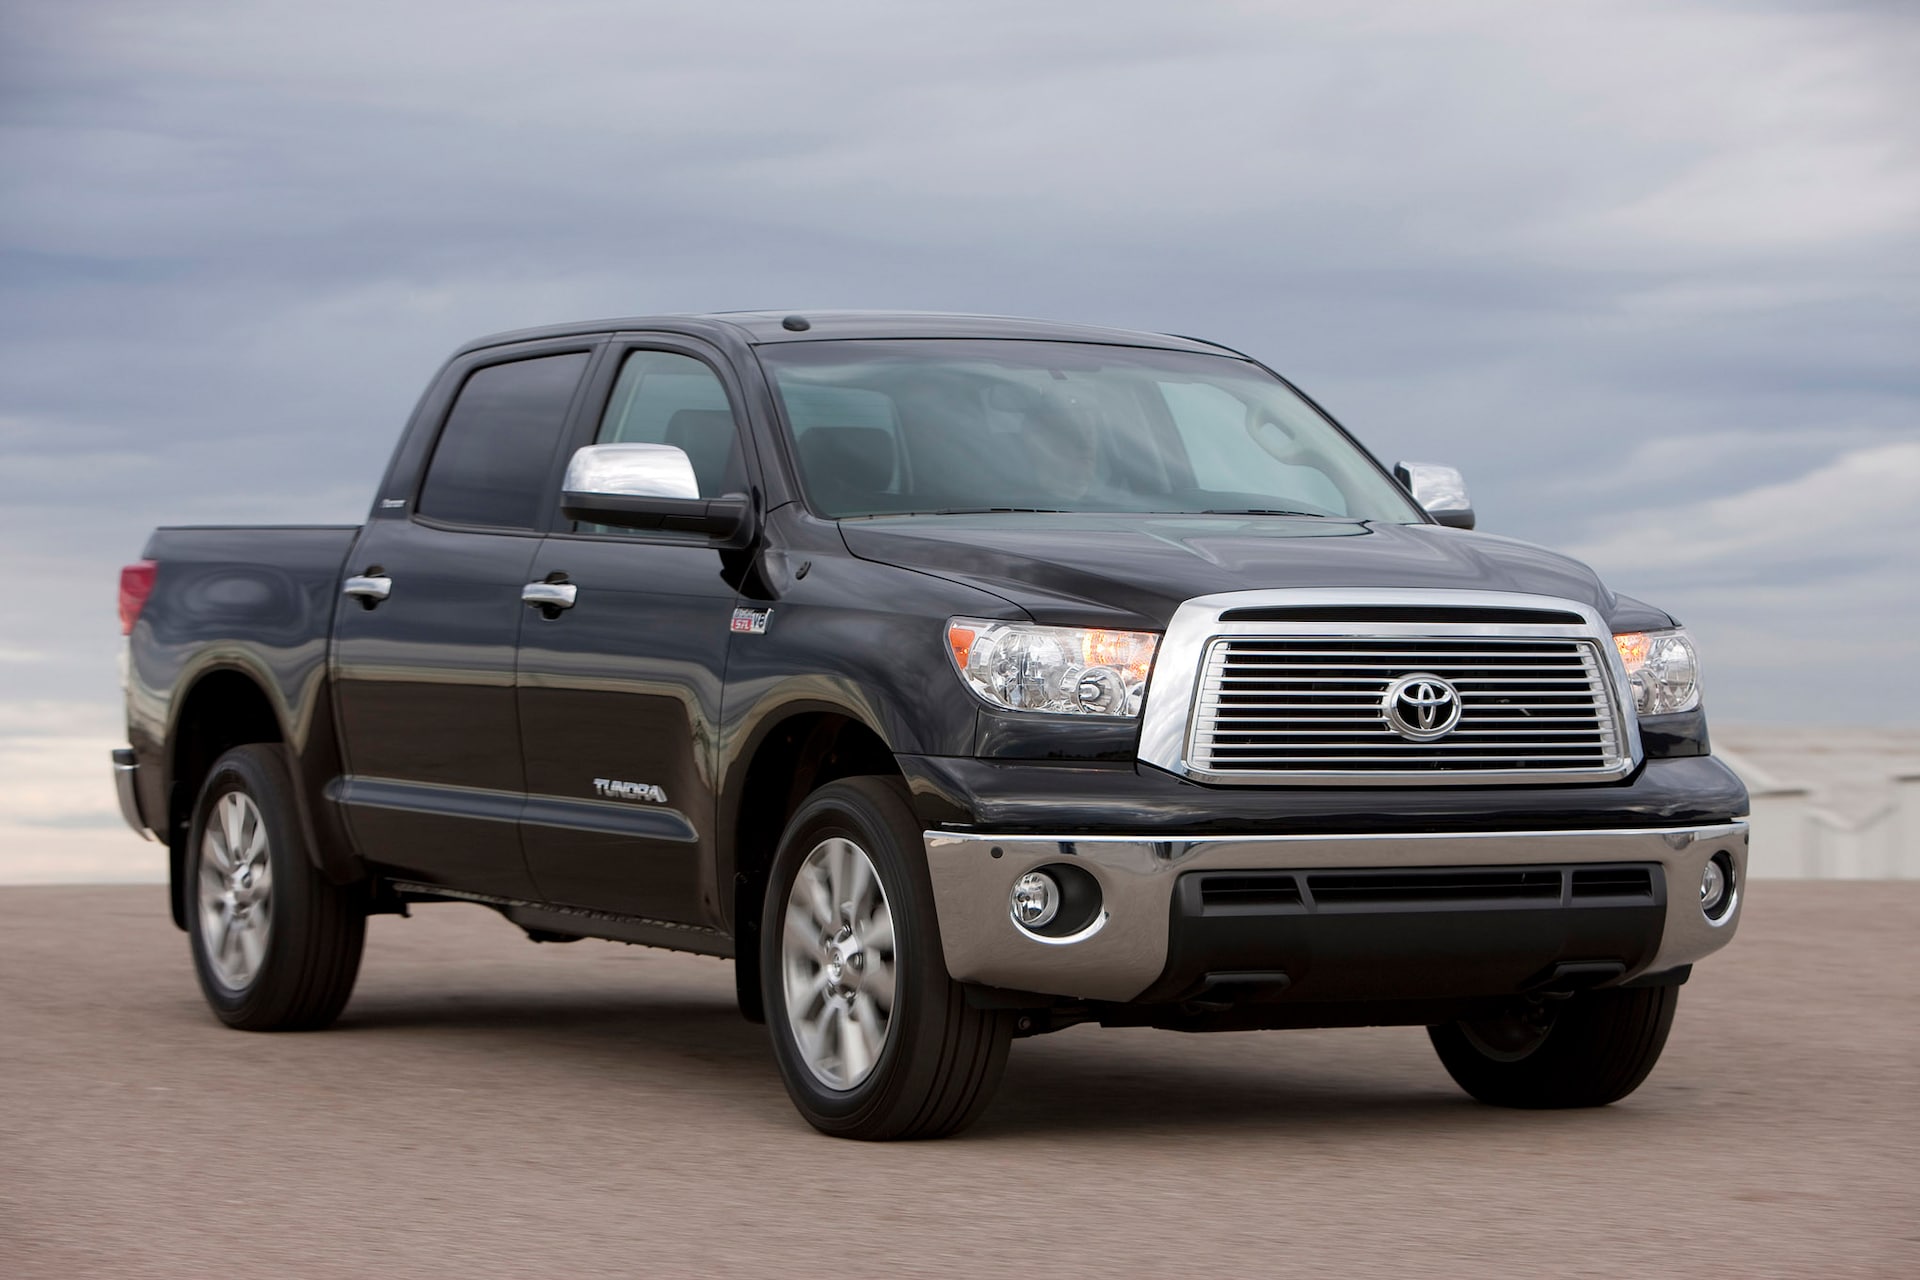 Pre-Owned: 2007 to 2013 Toyota Tundra